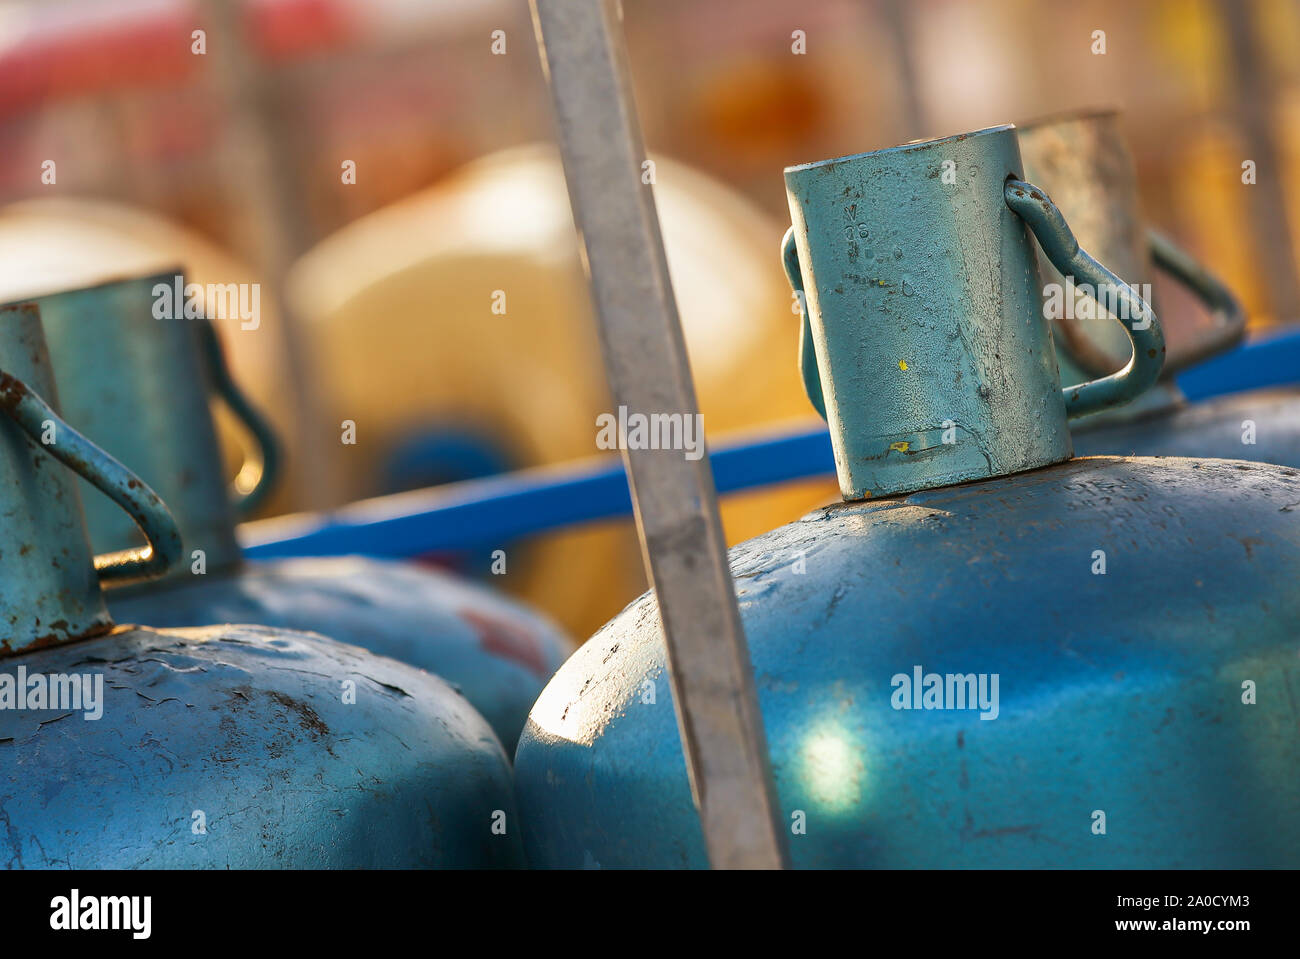 Closeup of stacks of gas cylinders on a distributor Stock Photo